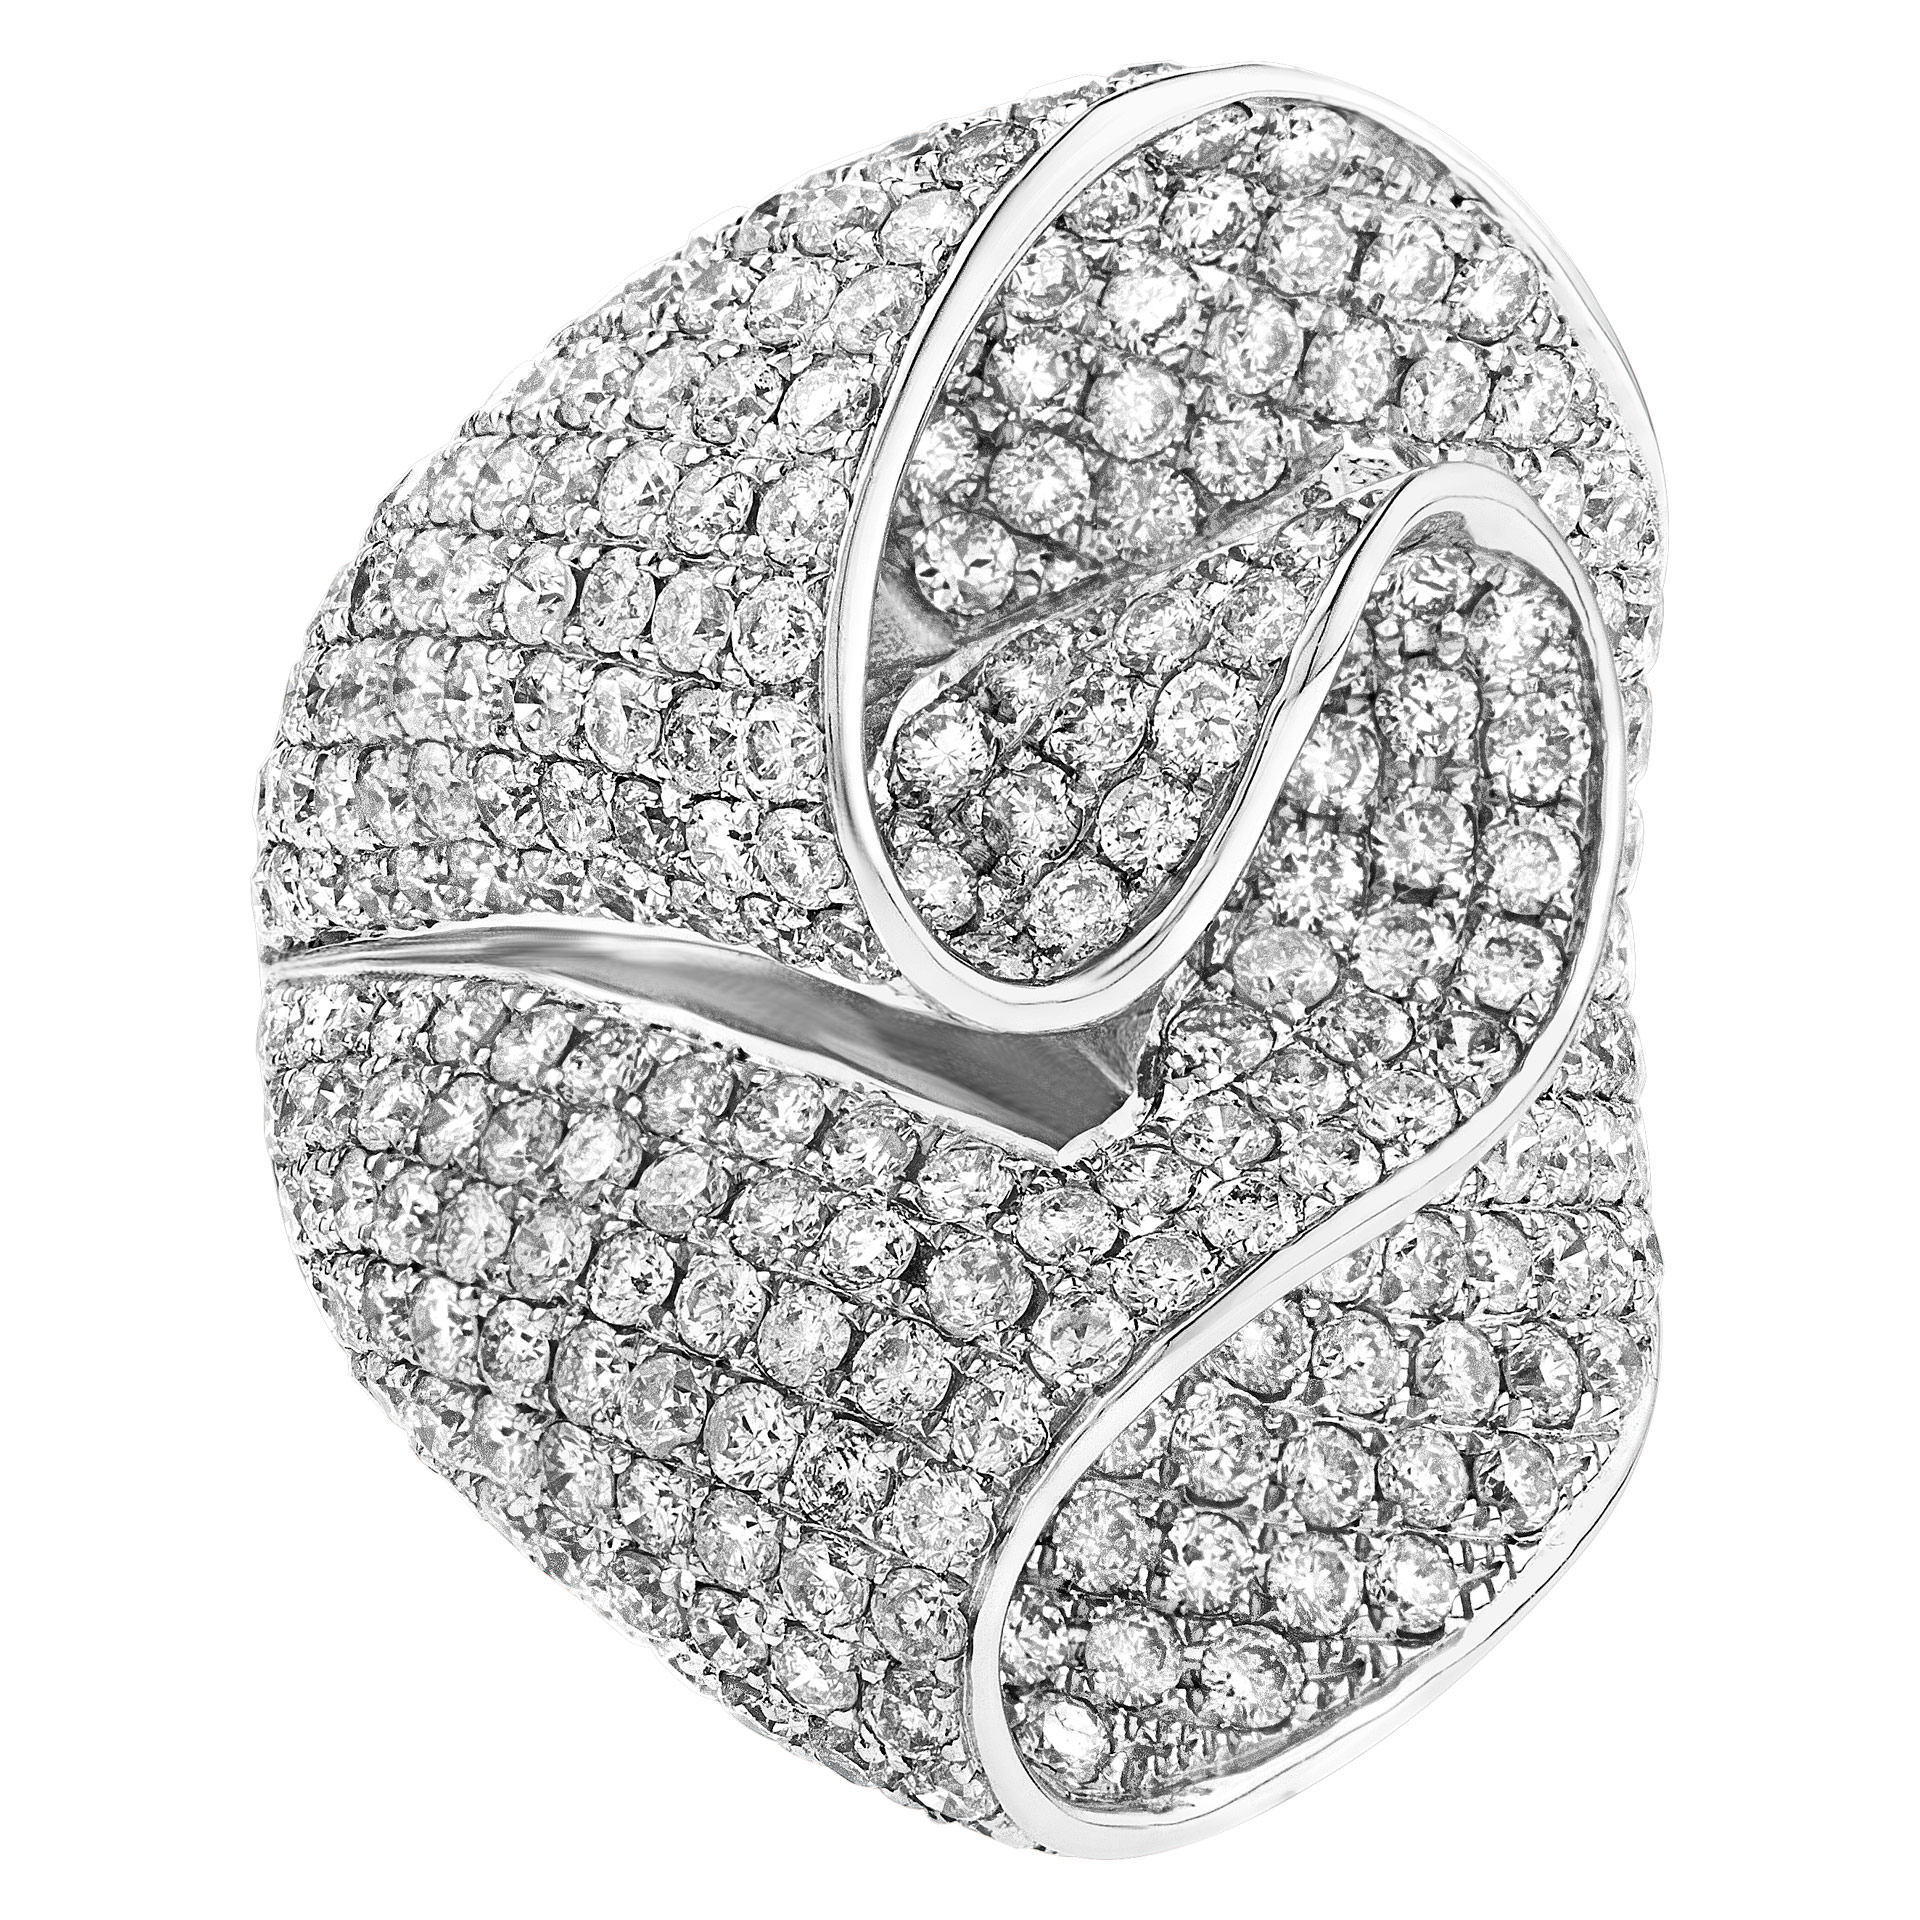 Magnificent pave diamond ring with 5.98 carats of round clean diamonds in 14k image 1